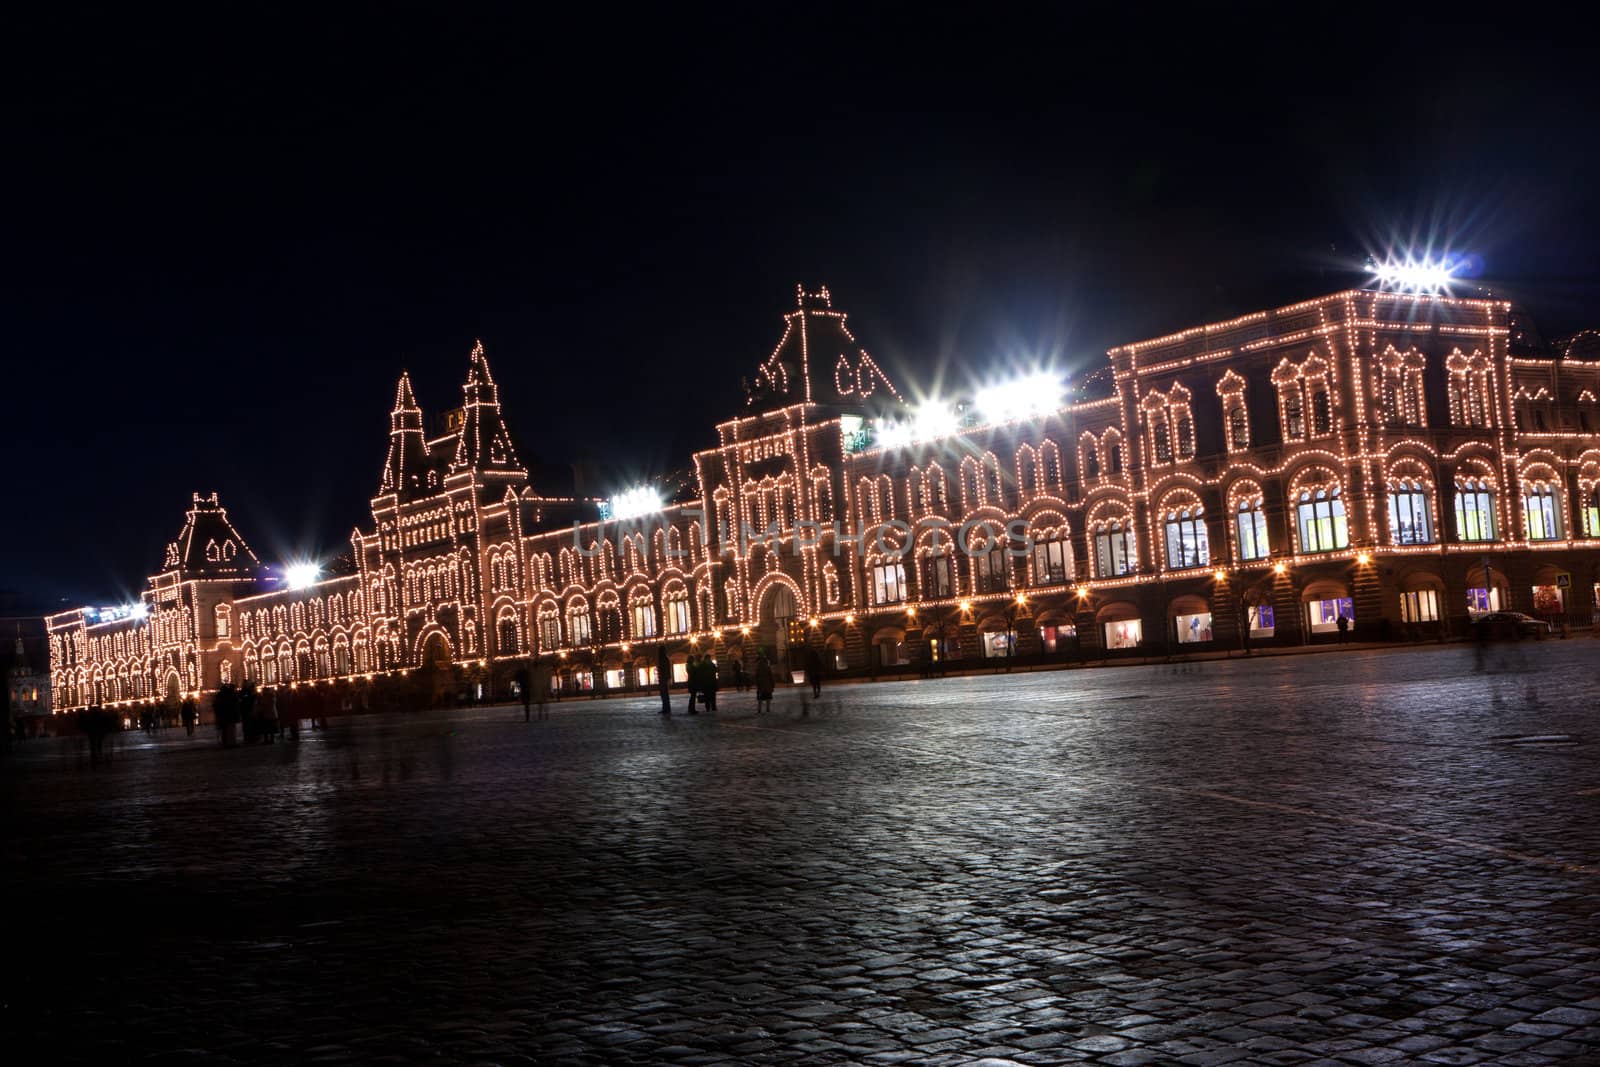 Red square in Moscow at night by nigerfoxy